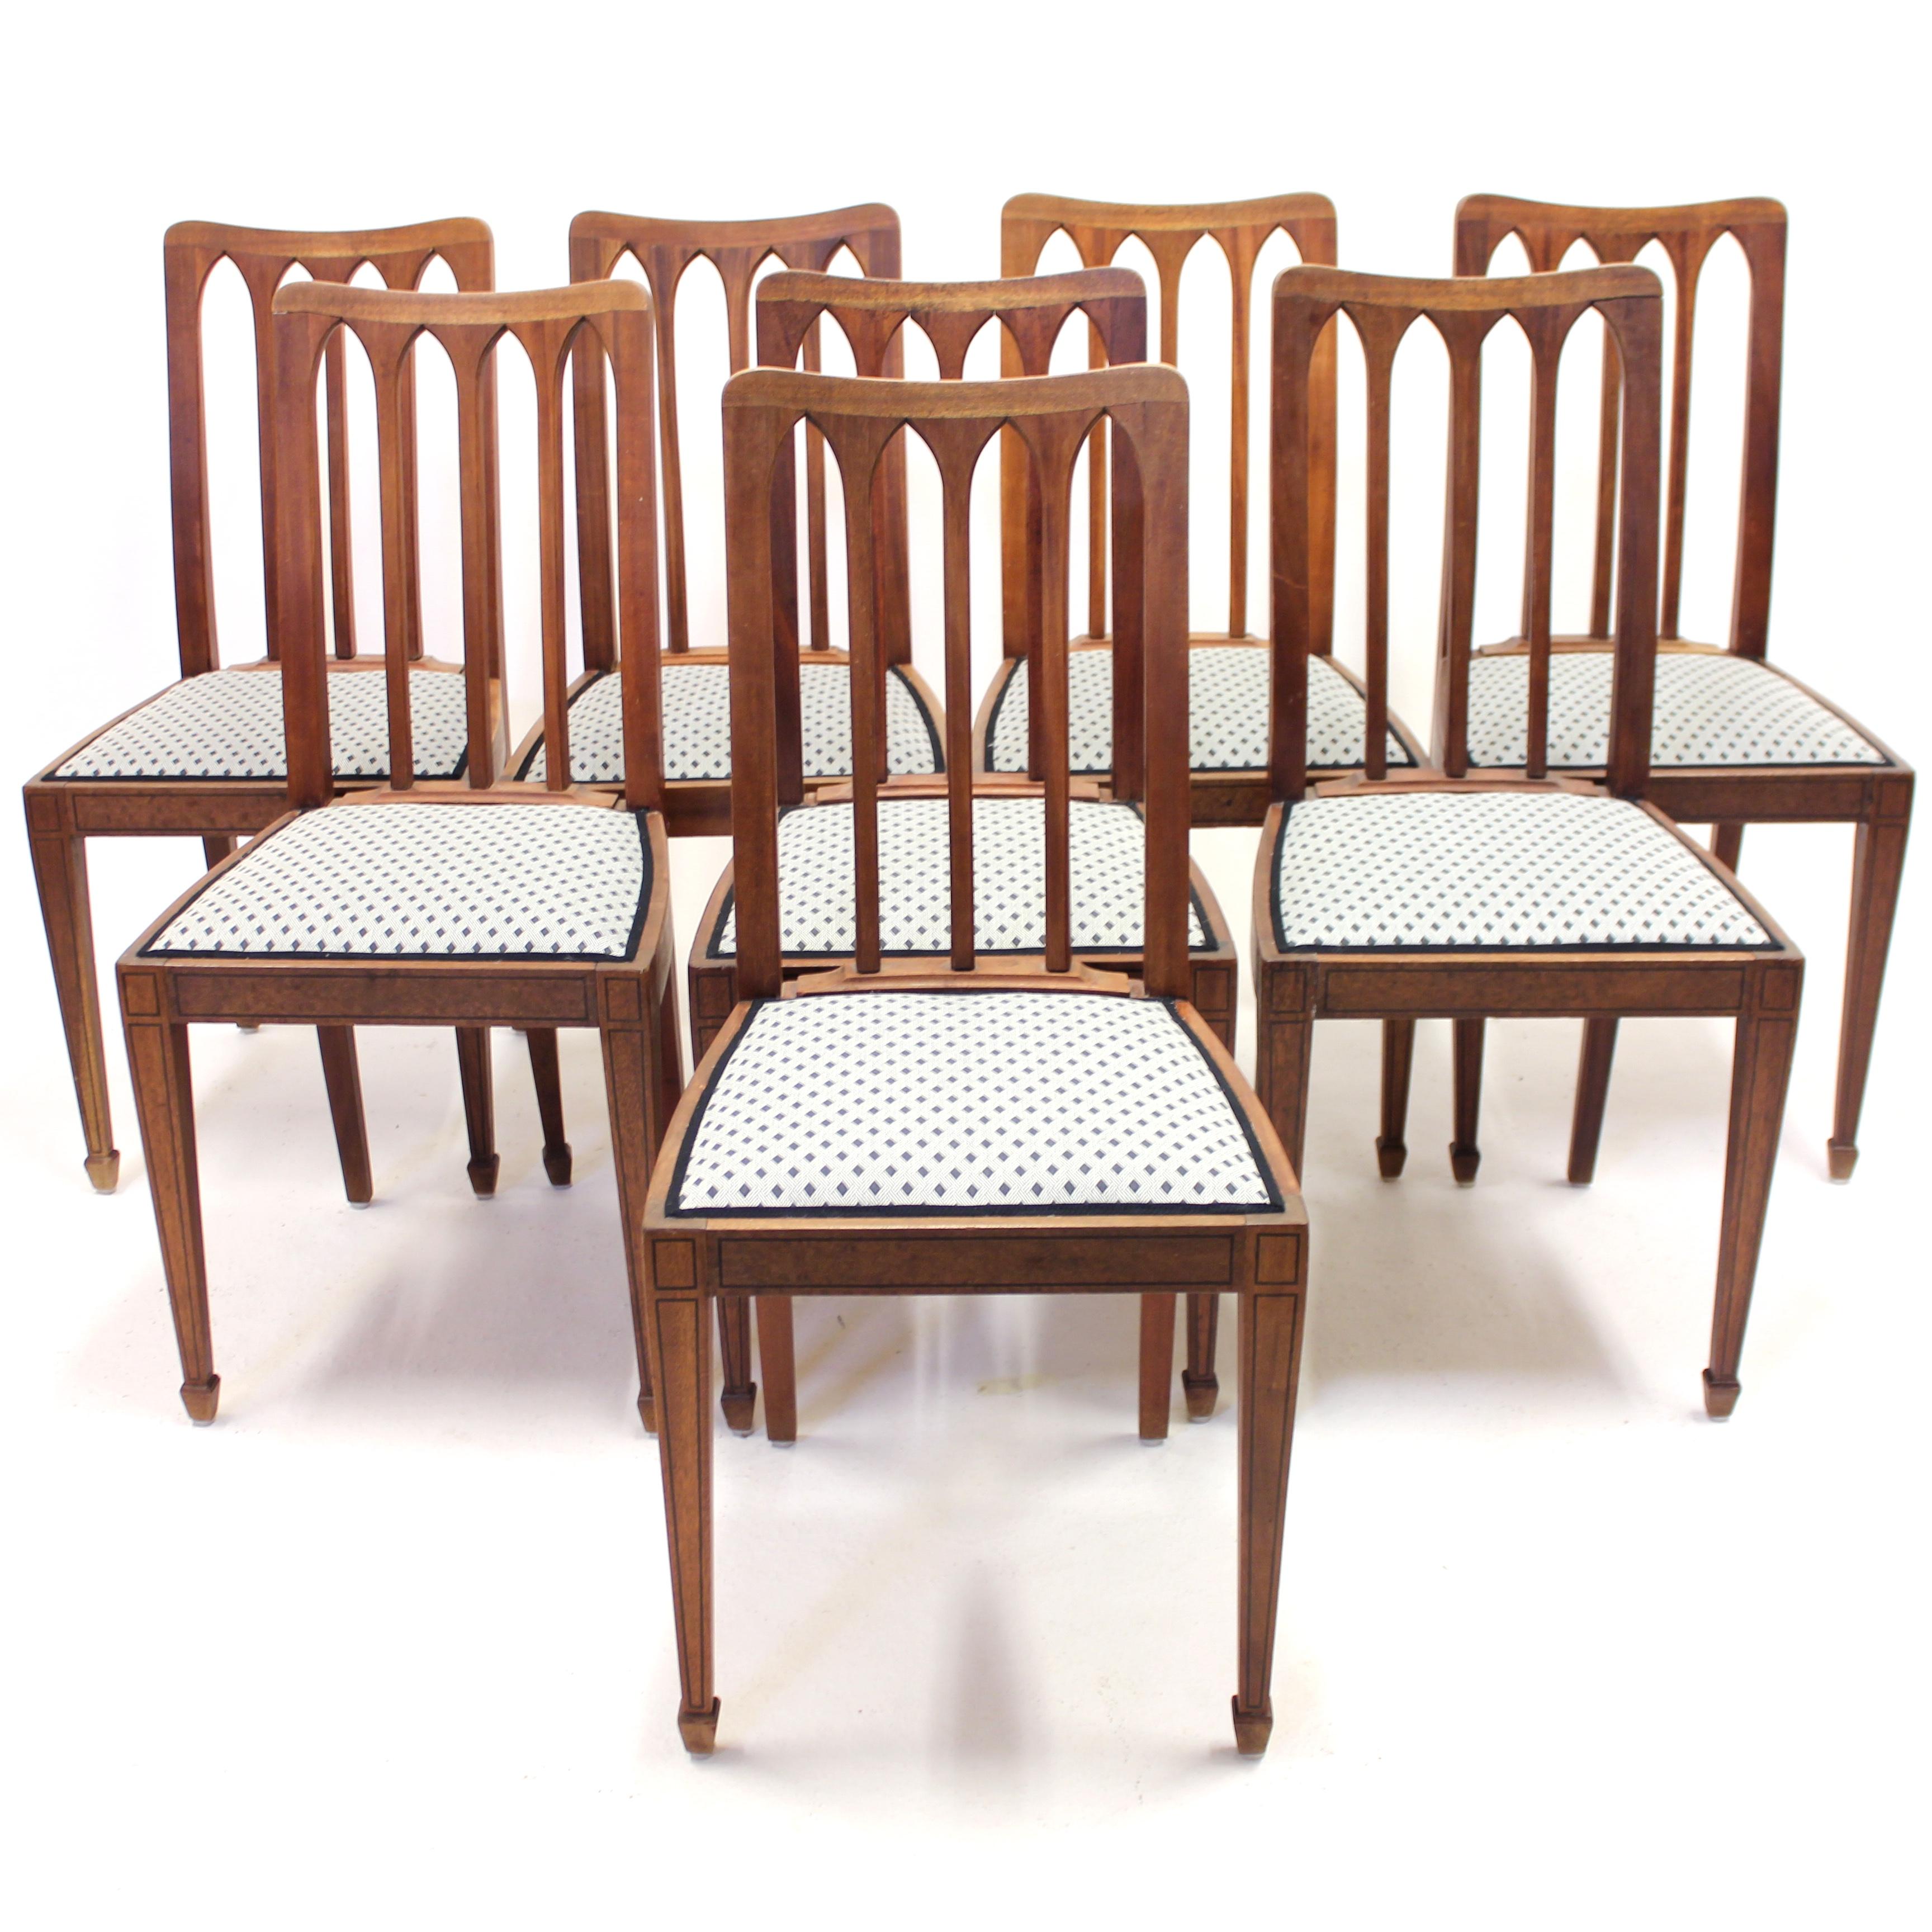 Set of 8 oak Arts & Crafts chairs with dark outlined inlays on the frames, made in the early 20th century. The back rests has four arches each, a very architectural element, in a very clean and minimalist design. Especially for being from the period